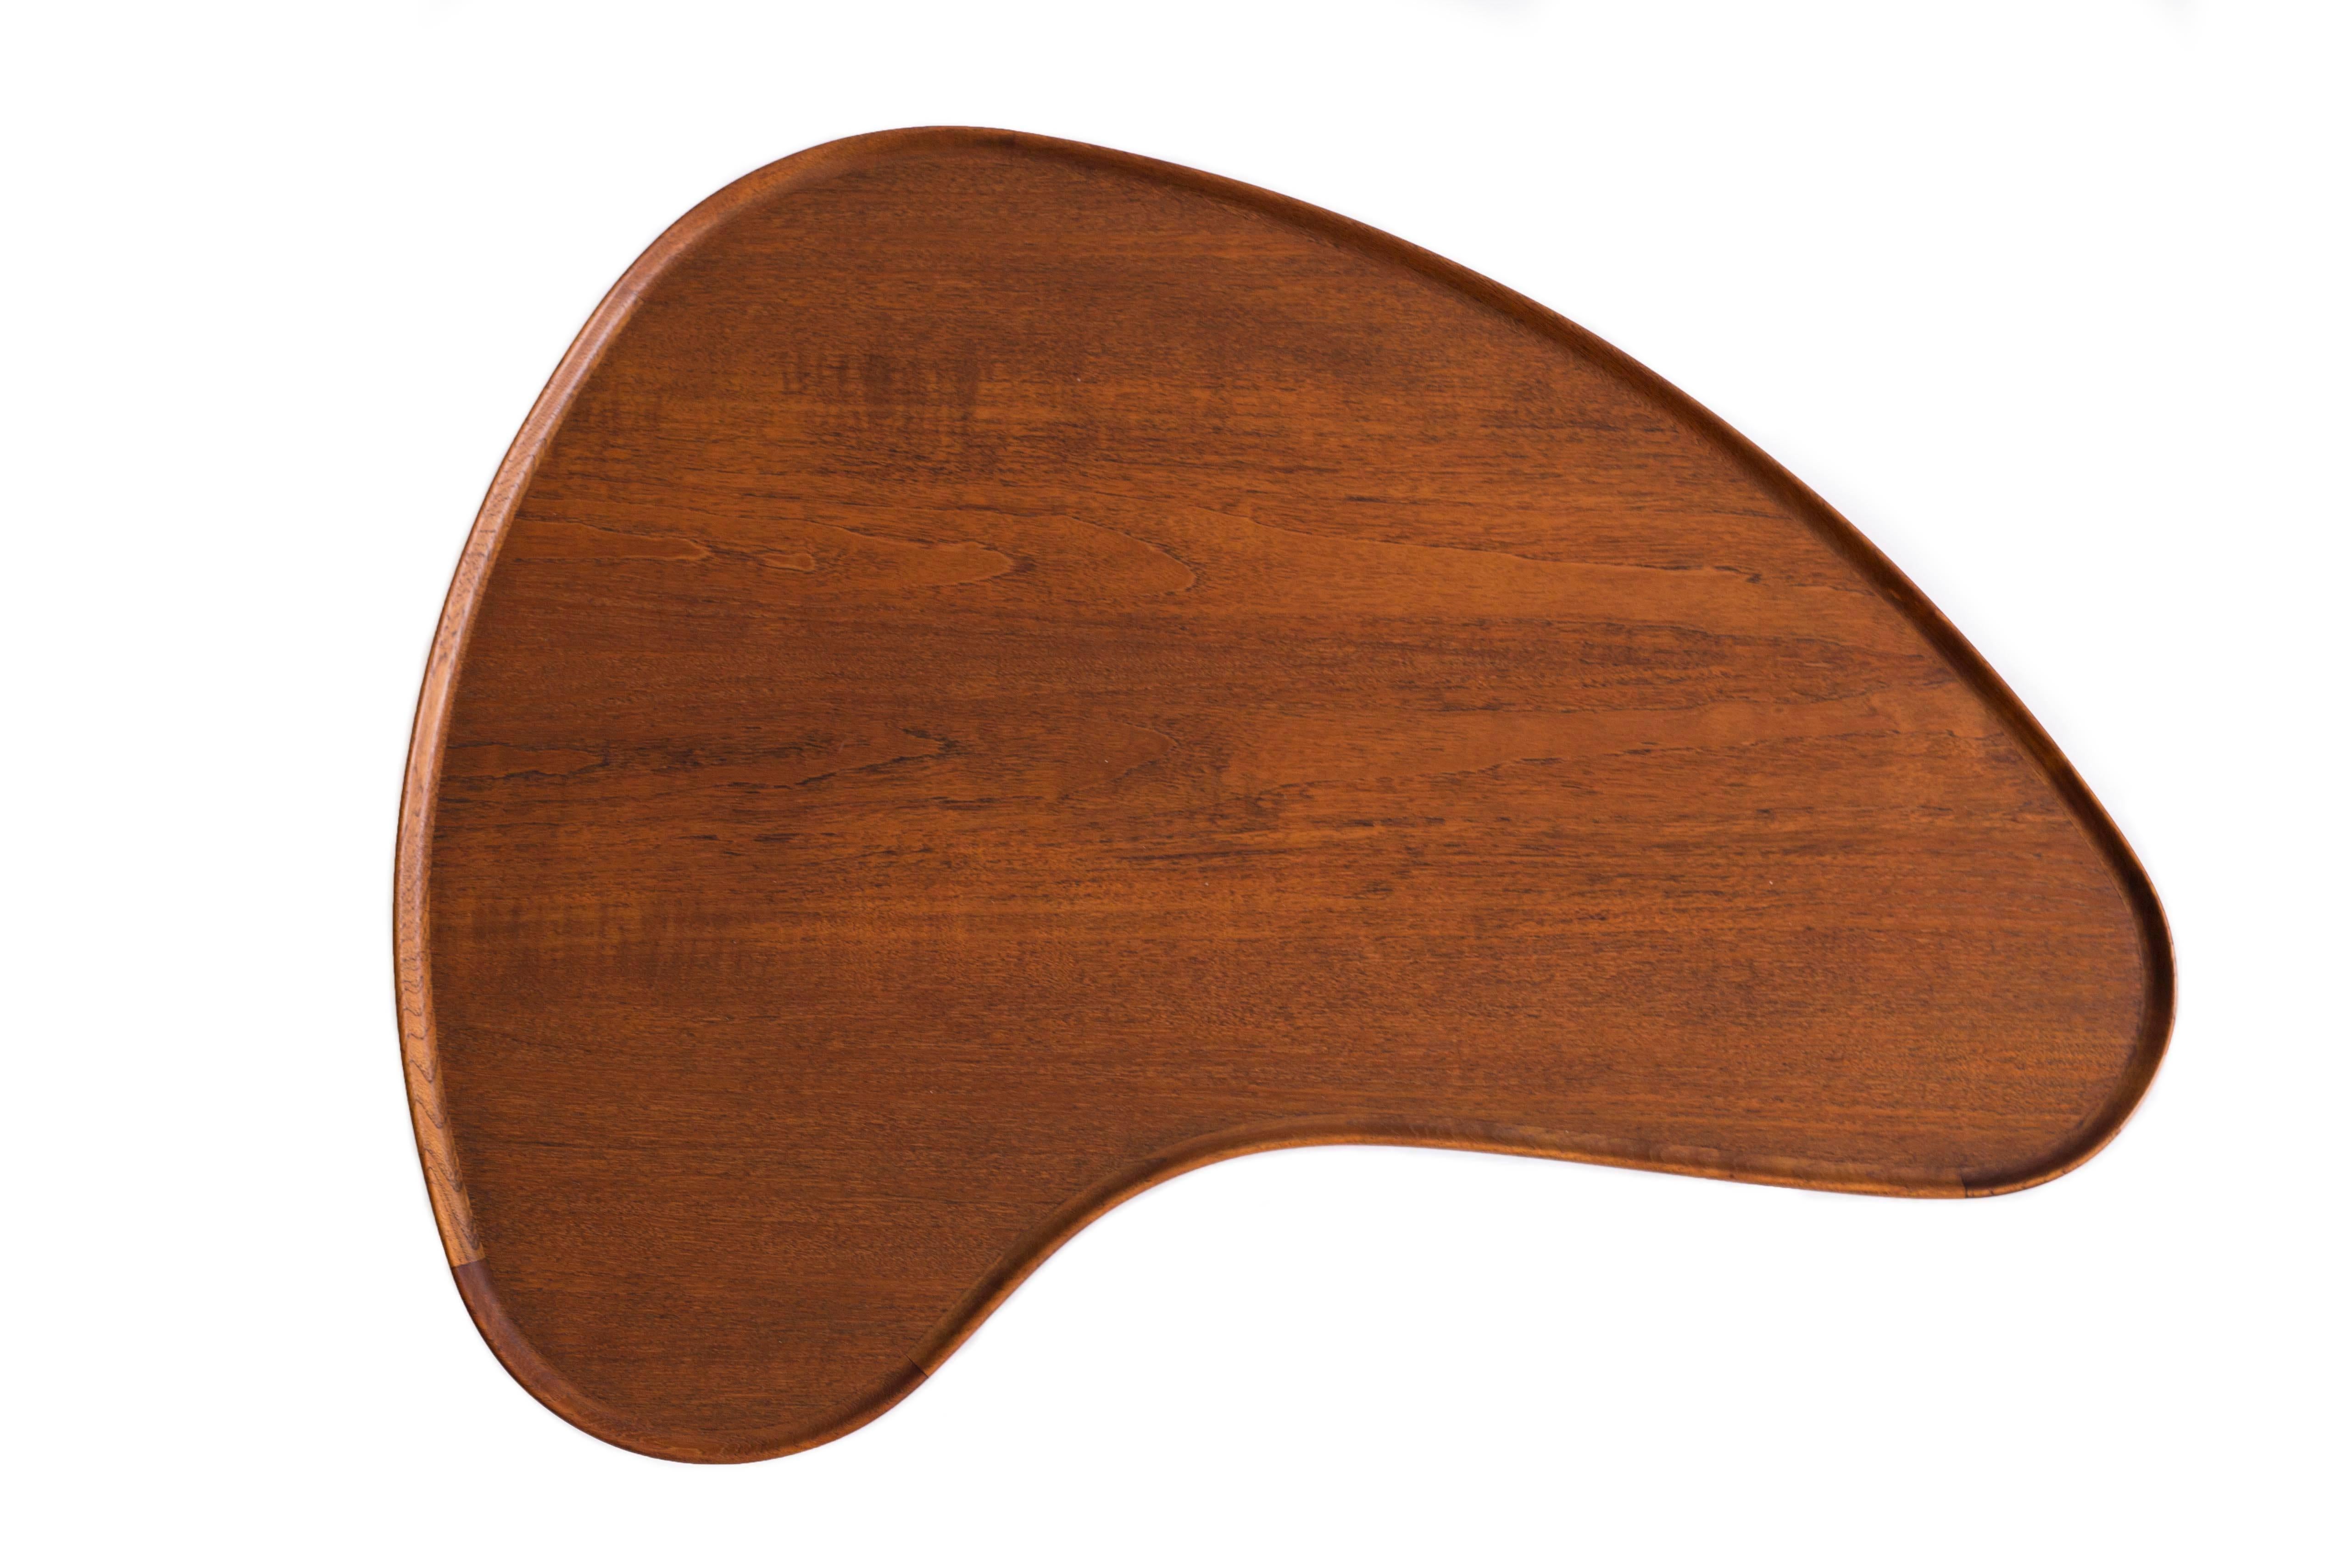 Arne Vodder kidney shaped coffee table with tabletop and shoes of teak, frame of patinated beech.

Designed by Arne Vodder in the 1950s and executed by Bovirke, Denmark.